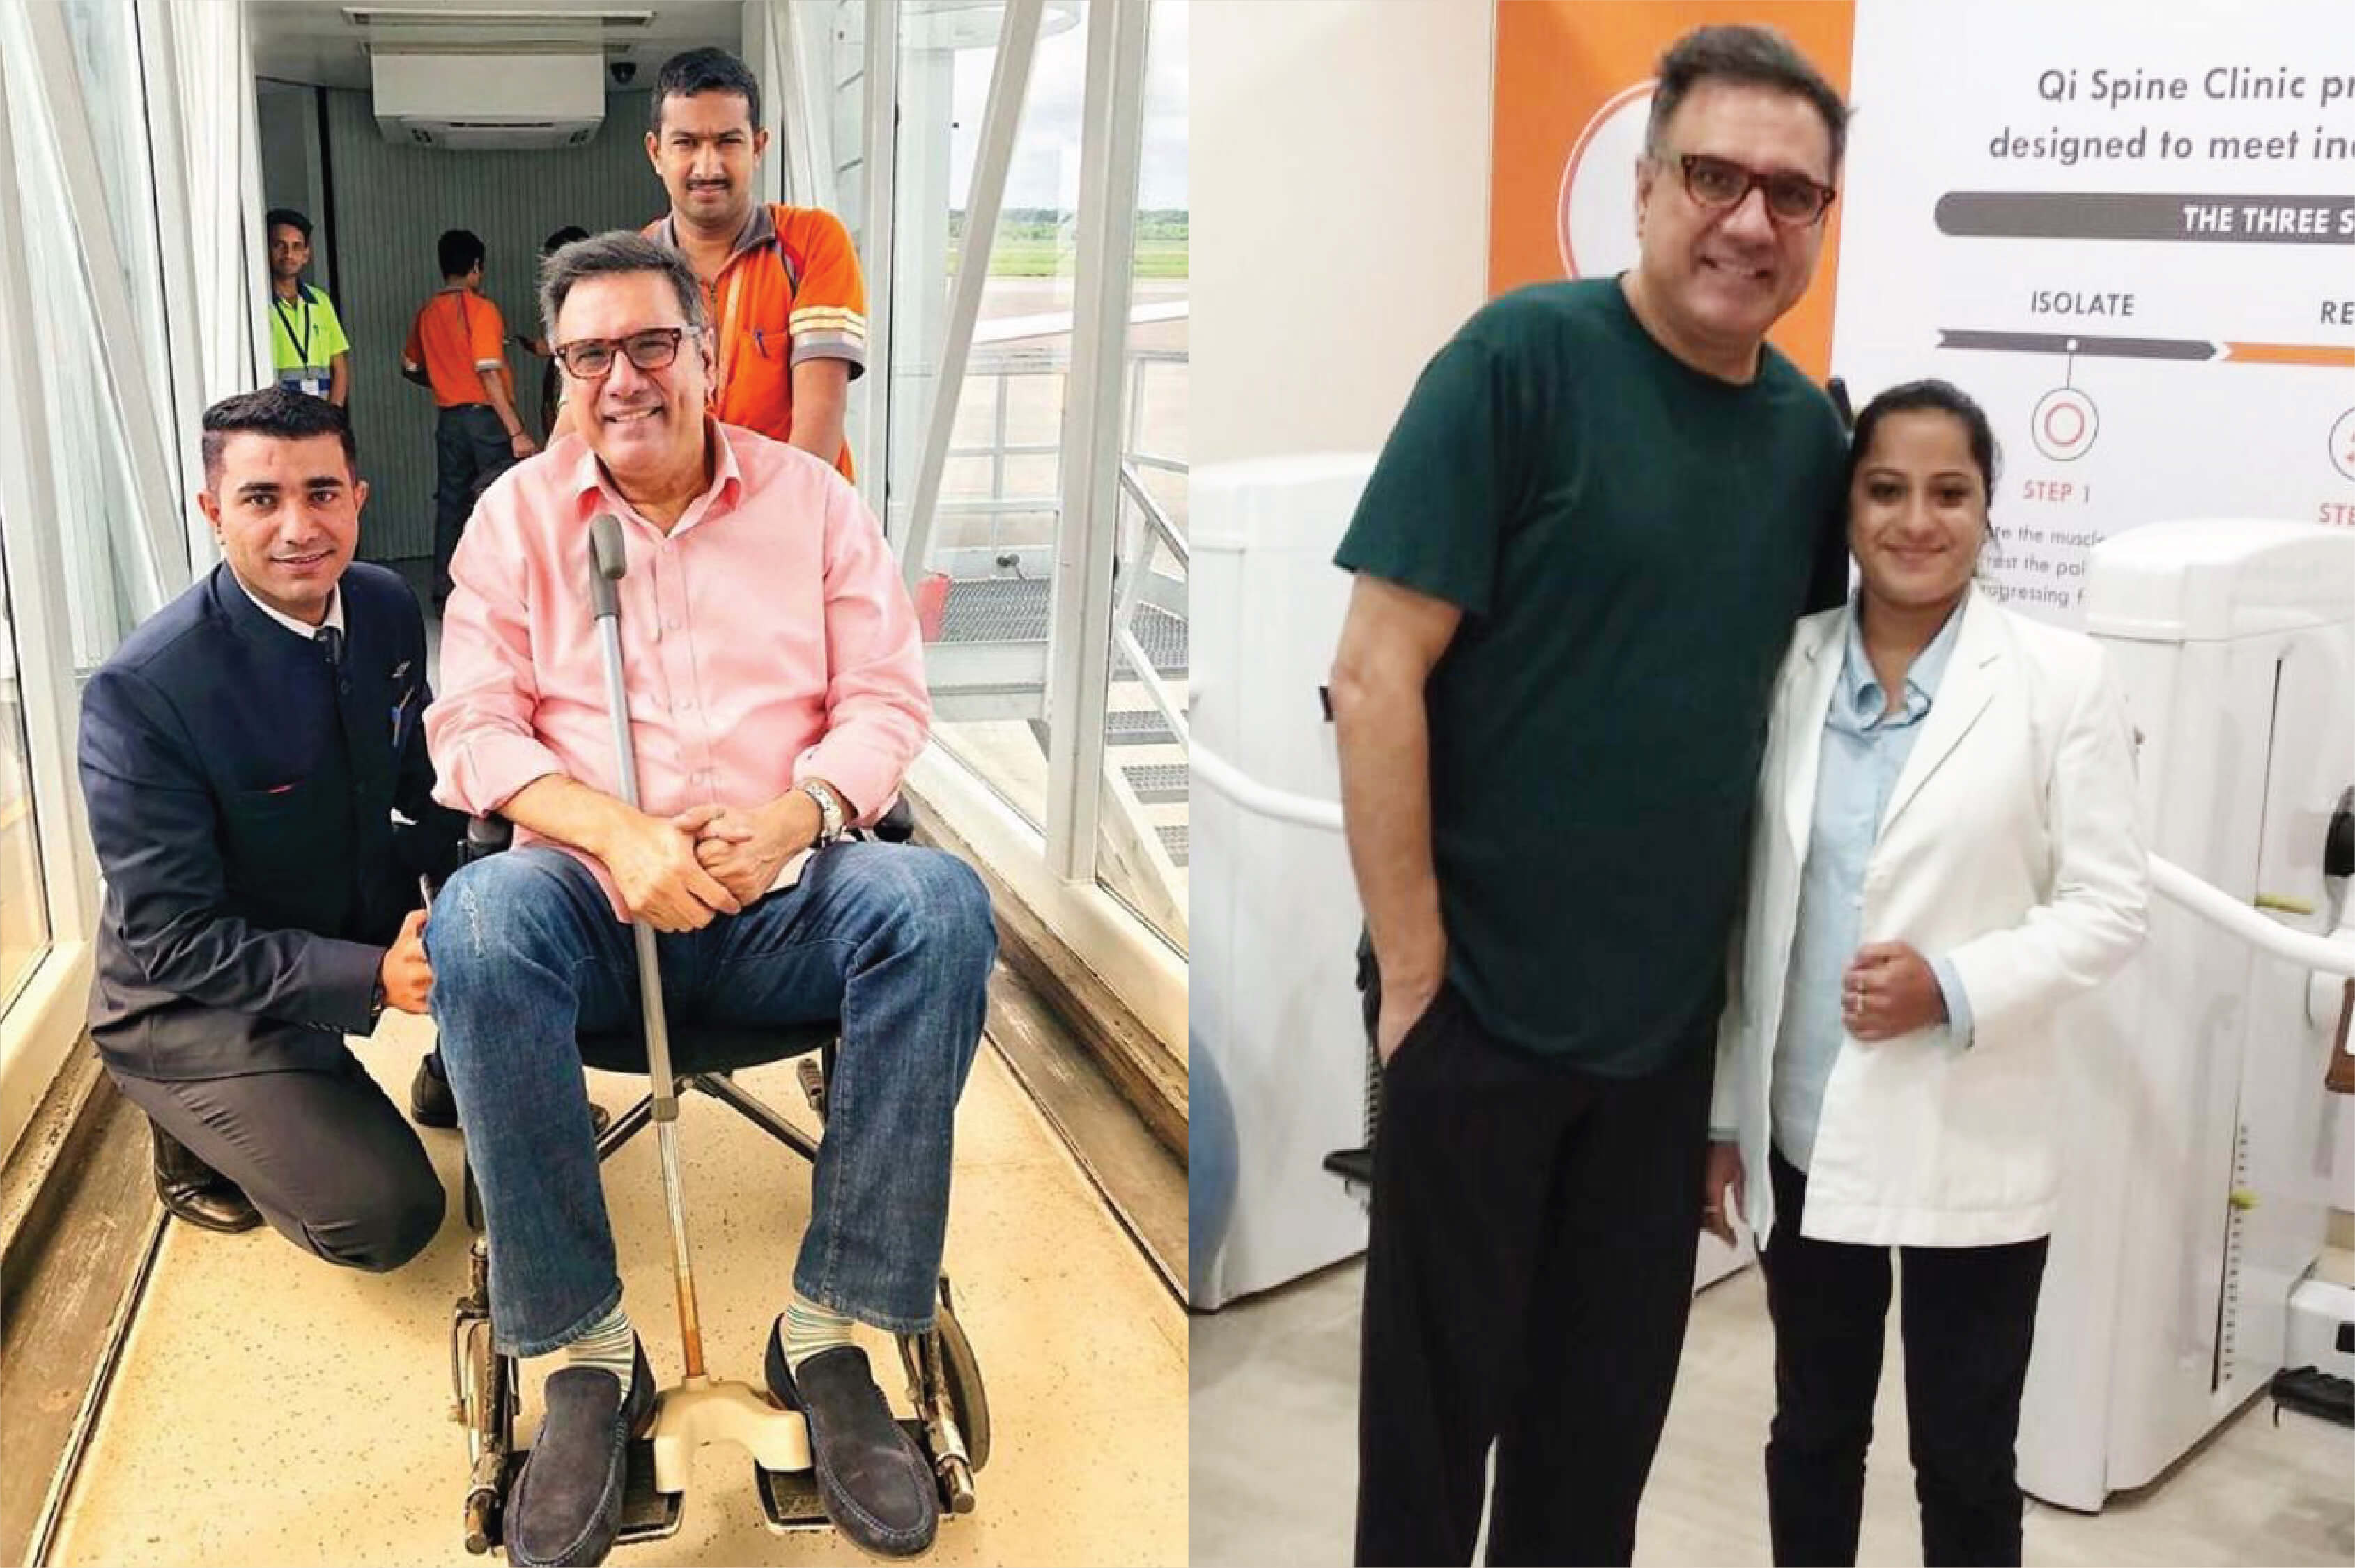 <h5>“Even sitting and sleeping had become difficult. I was told – go in for surgery. QI Spine Clinic got me back on my feet in 3 weeks” – Boman Irani</h5>